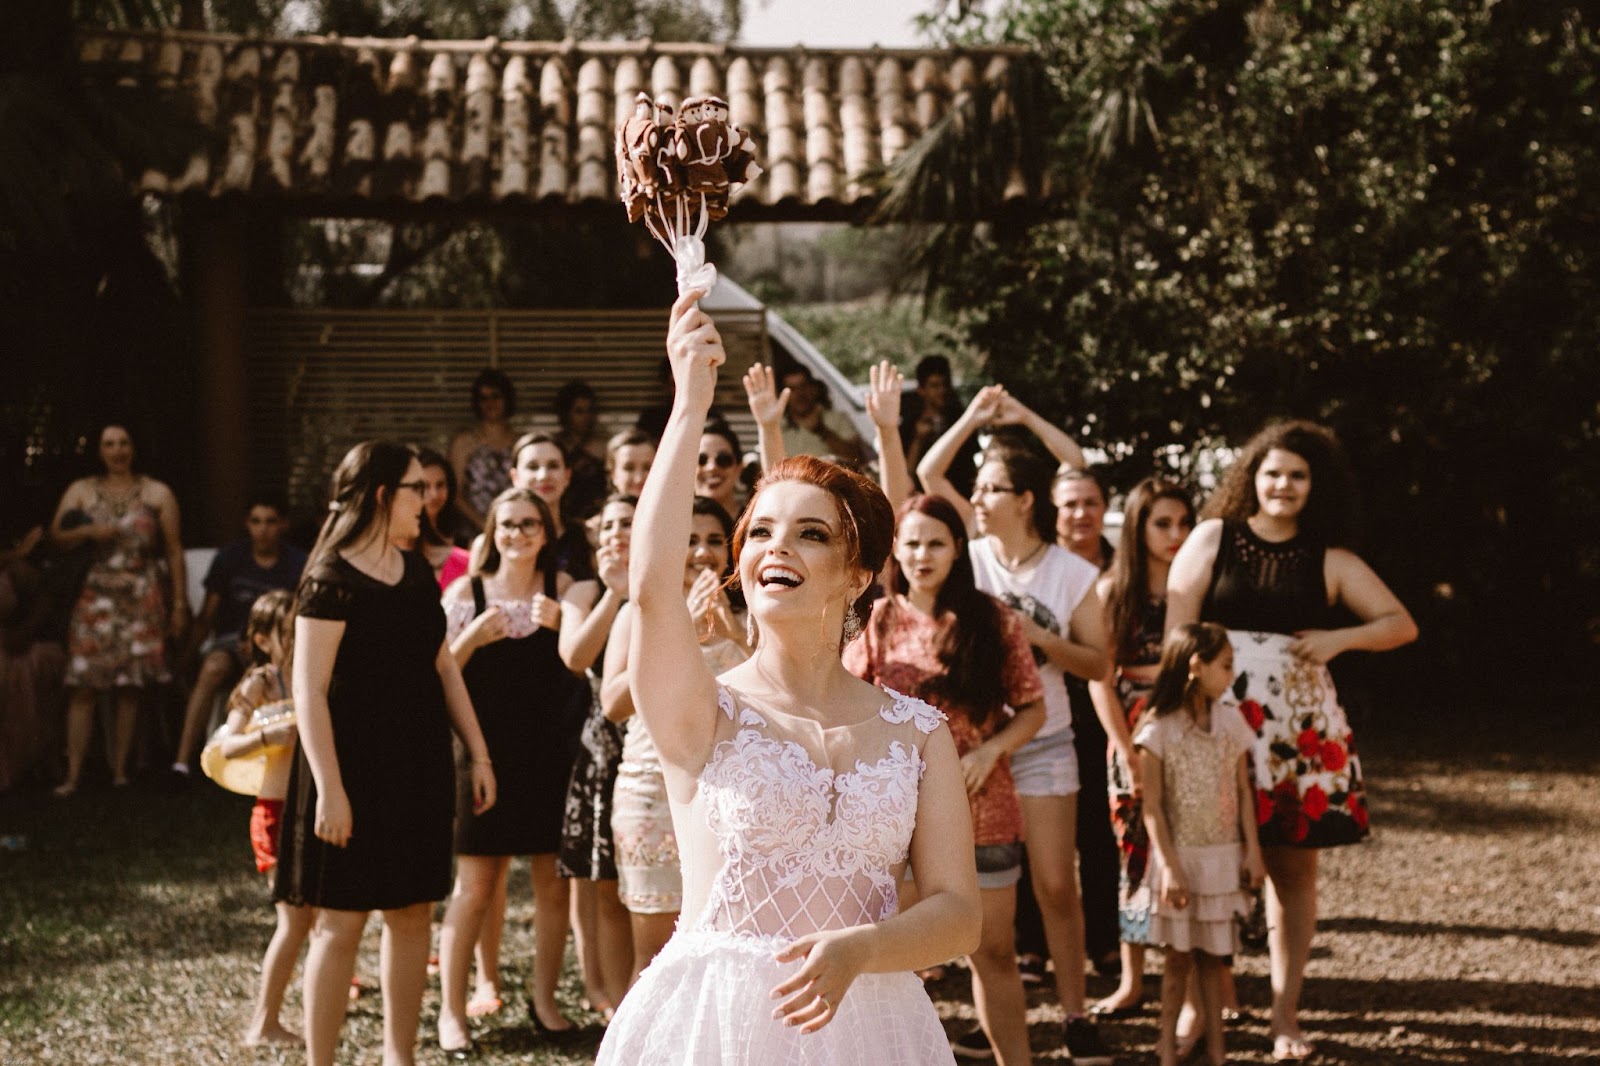 A bride tosses a bouquet of childhood dolls to the women who attended her fall ceremony